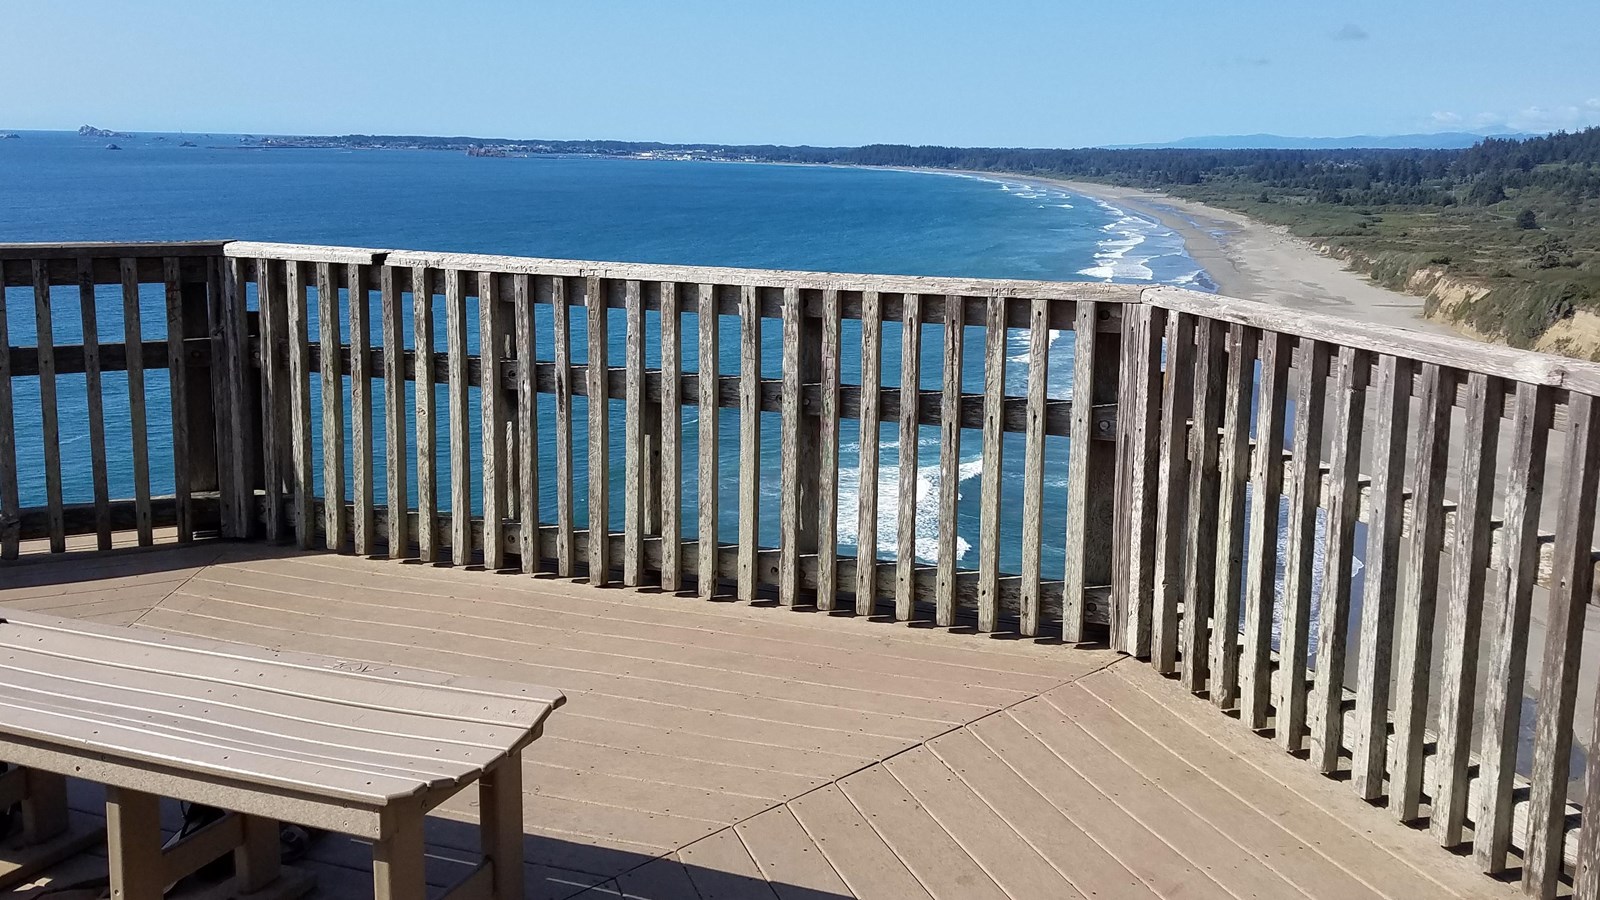 Wooden platform and handrails over look a blue ocean and sweeping beach.